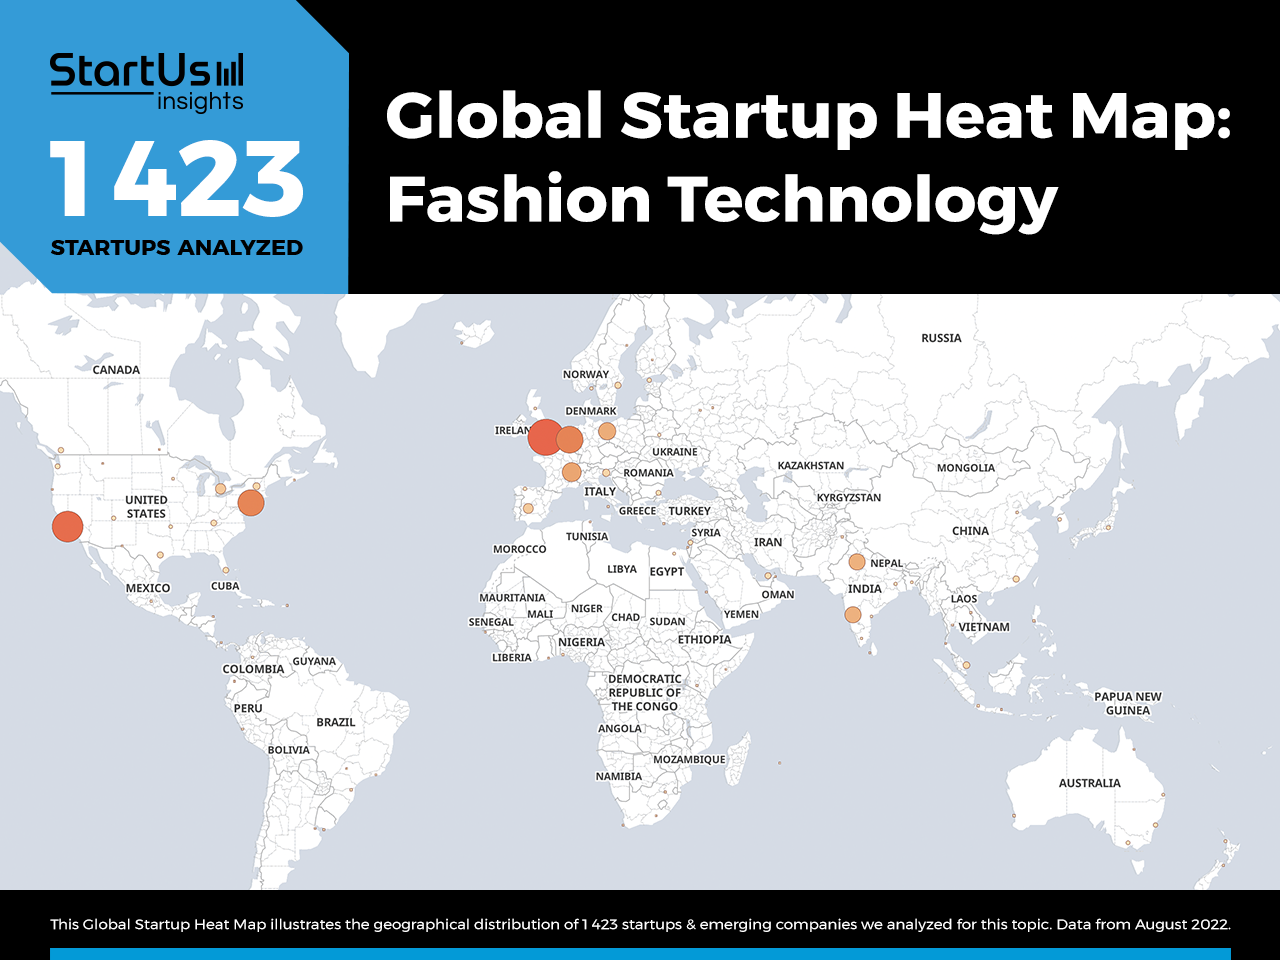 Fashion-Technology-trends-innovation-Startups-TrendResearch-Heat-Map-StartUs-Insights-noresize